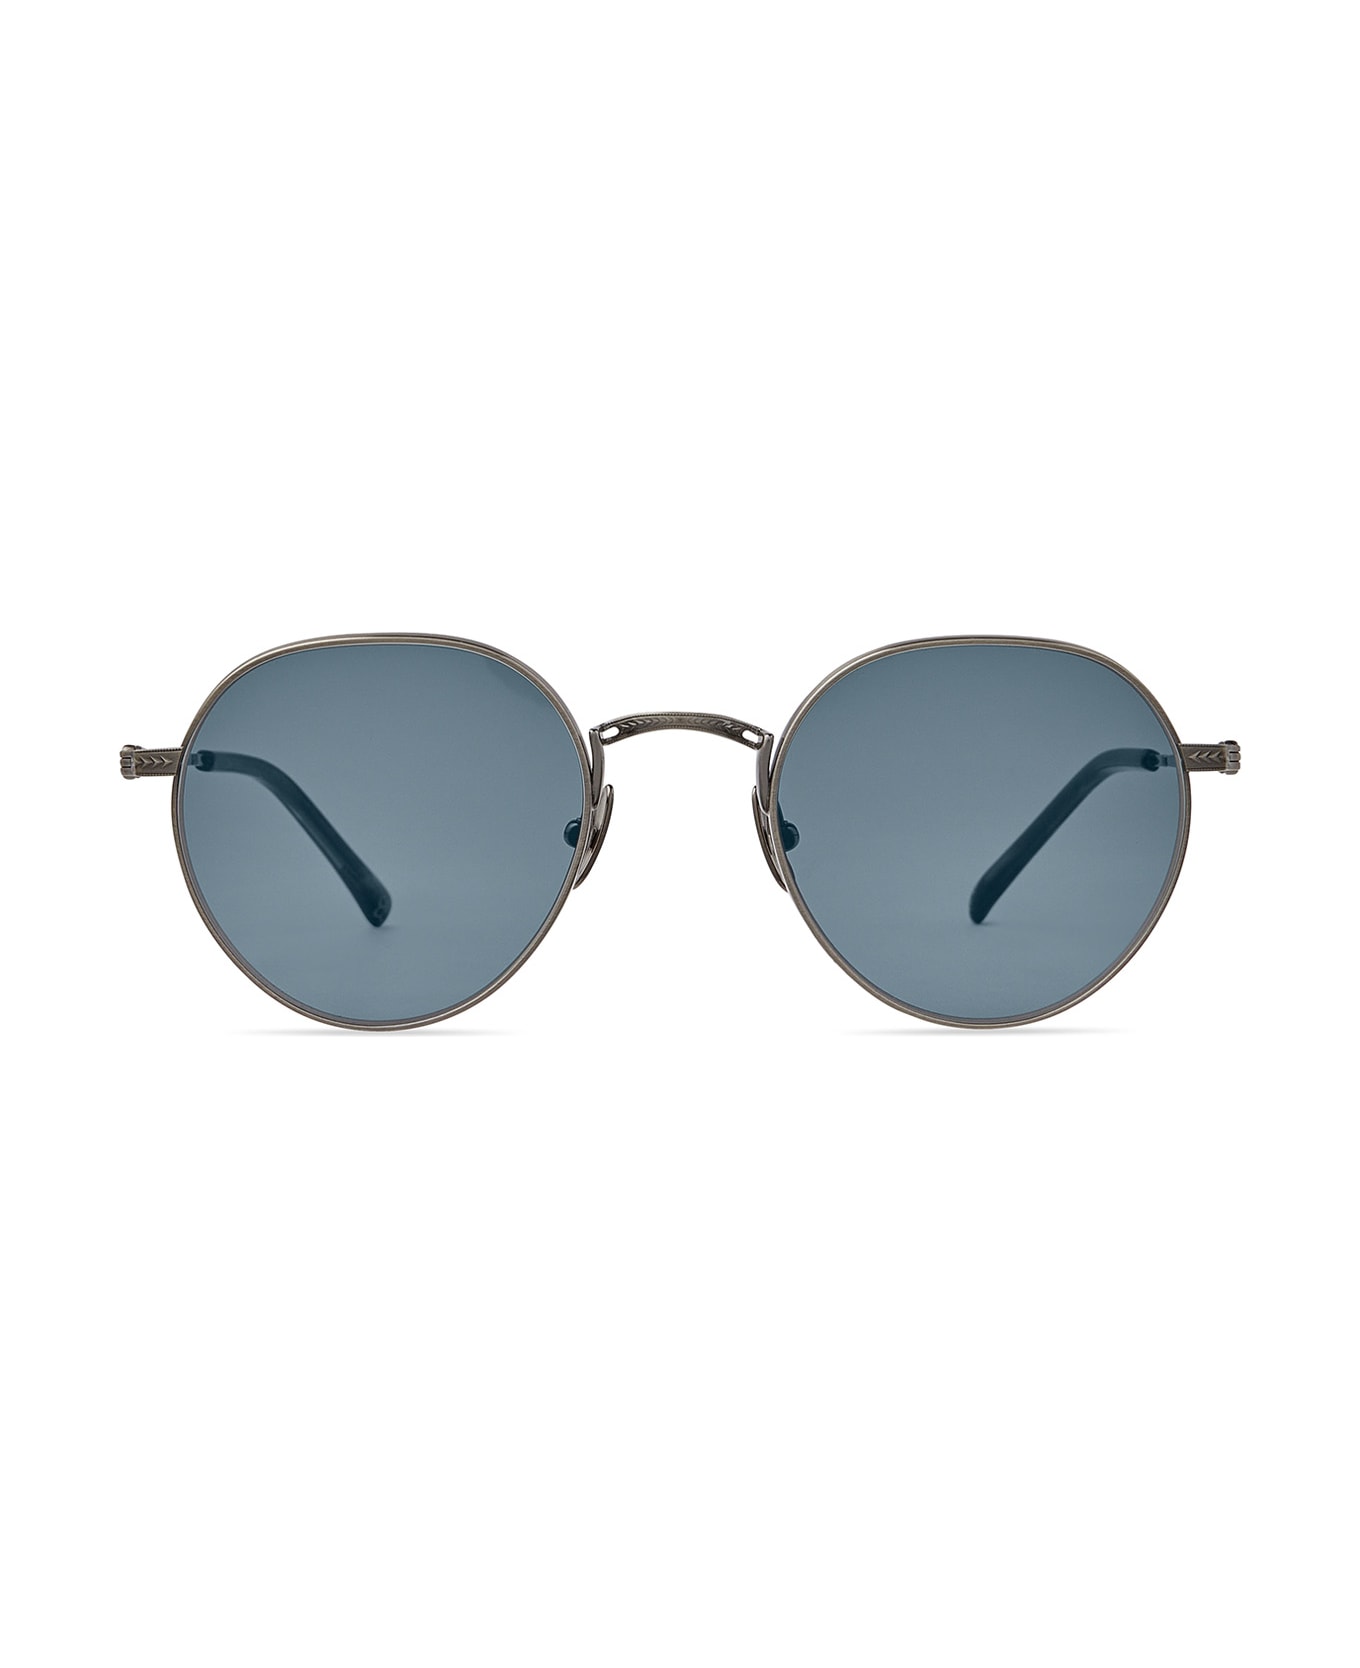 Mr. Leight Hachi S Pewter-matte Coldwater/semi-flat Presidential Blue Sunglasses - Pewter-Matte Coldwater/Semi-Flat Presidential Blue